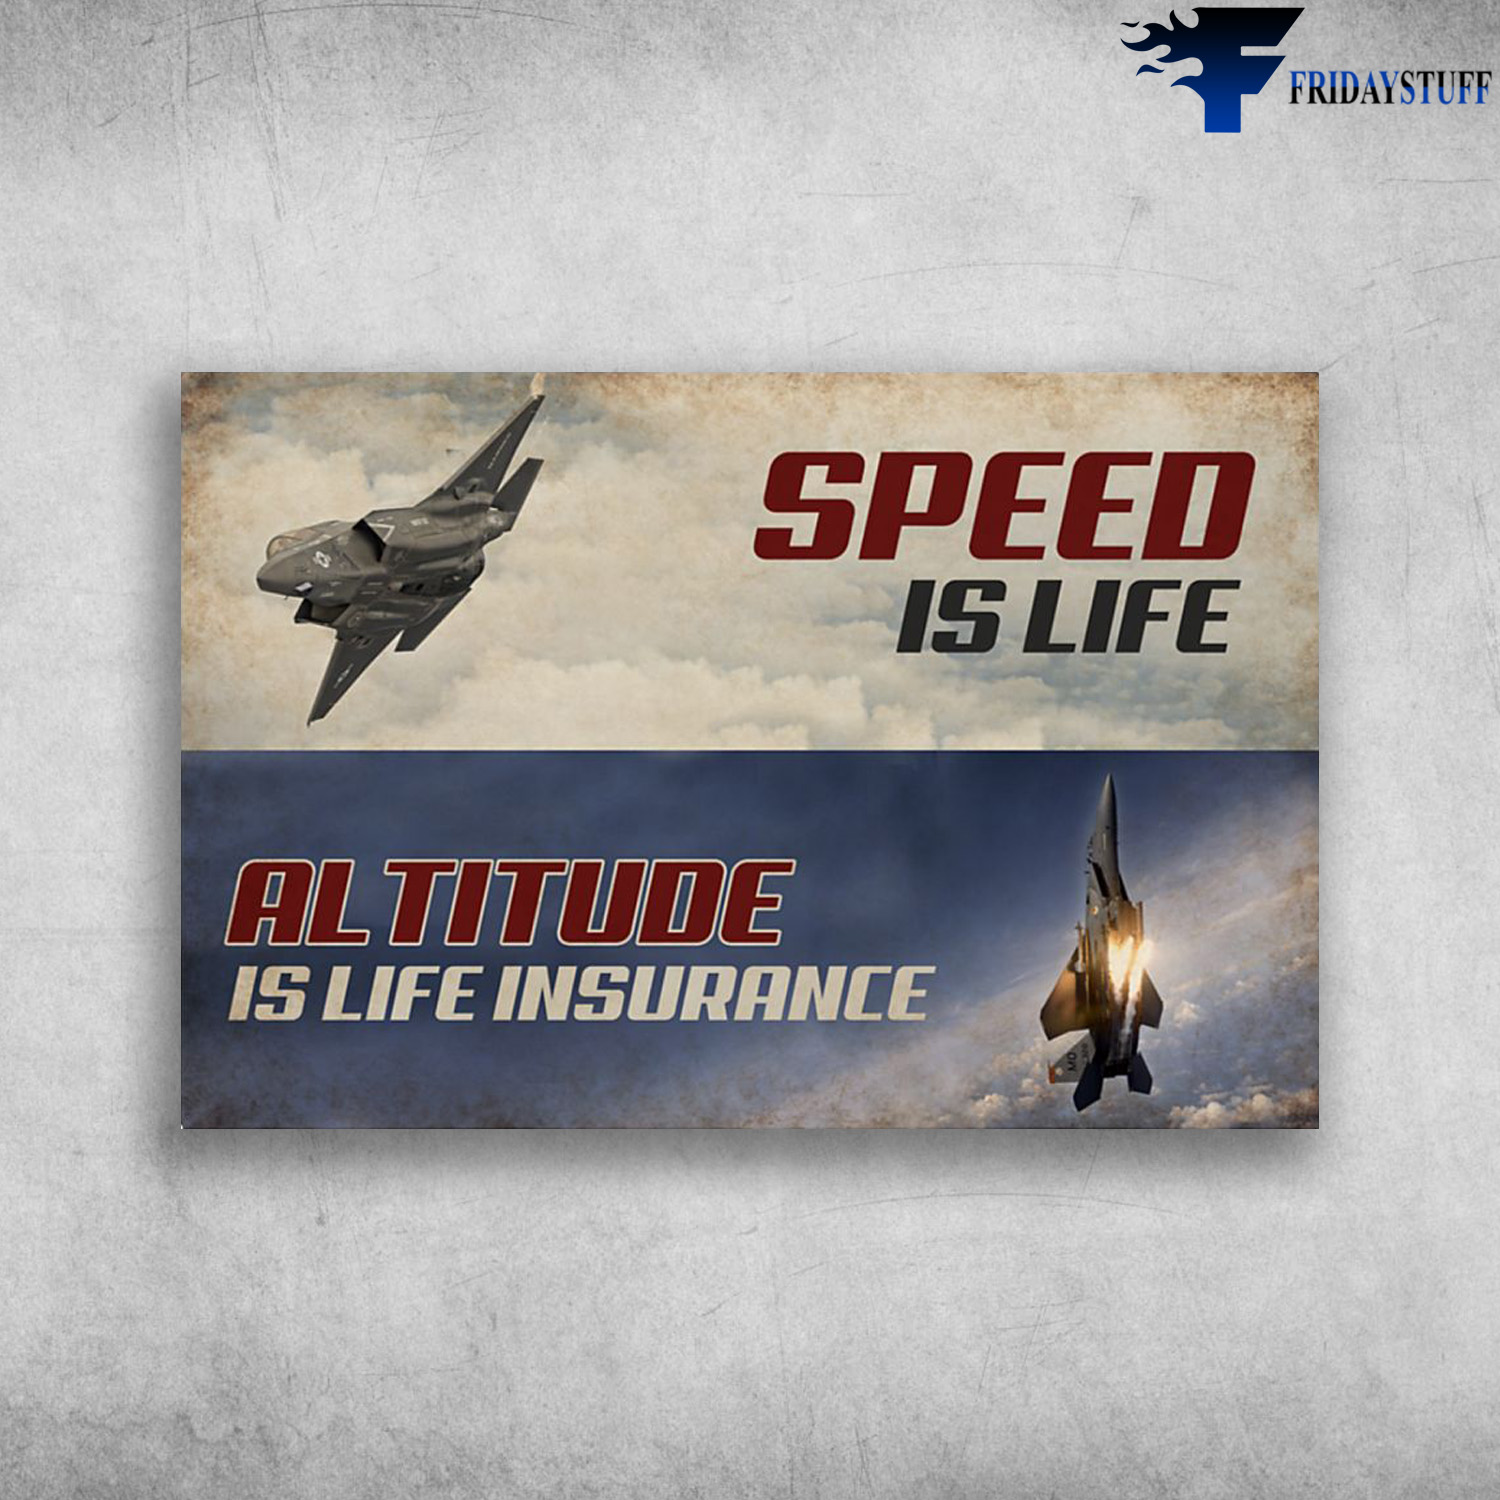 Military Aircraft - Speed Is Life, Altitude Is Life Insurance